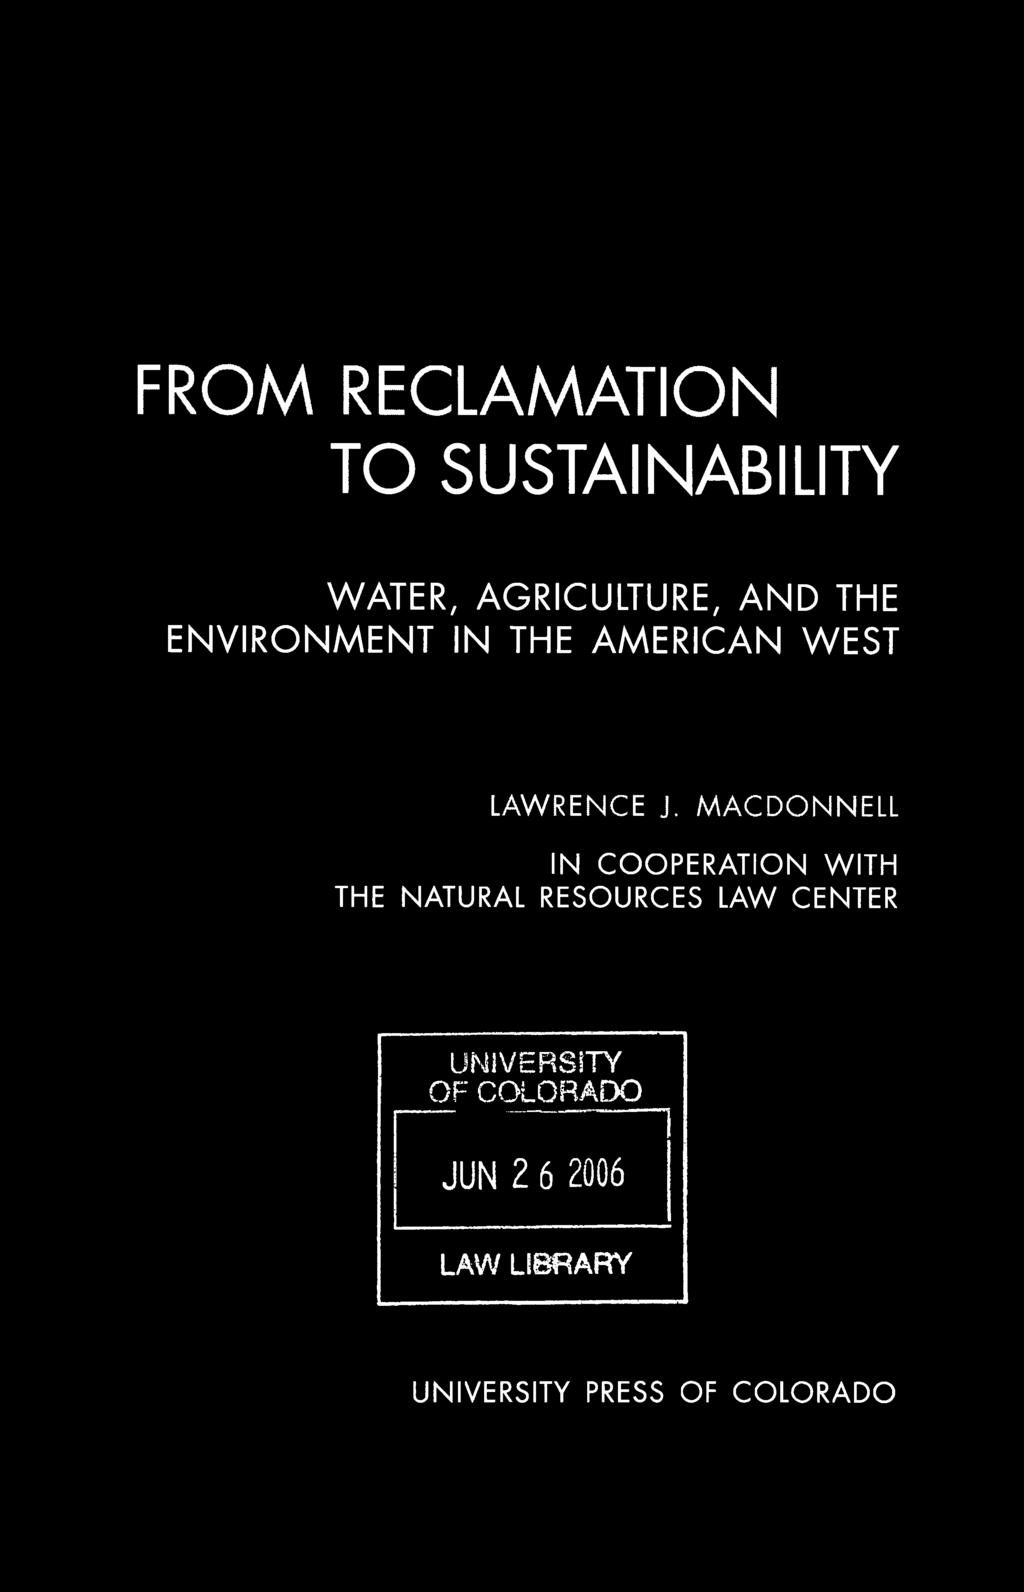 FRO M REC LA M A TIO N TO SUSTAINABILITY W A TER, A G RIC ULTURE, A N D TH E E N V IR O N M E N T IN TH E A M ERIC A N W E S T LAWRENCE J.